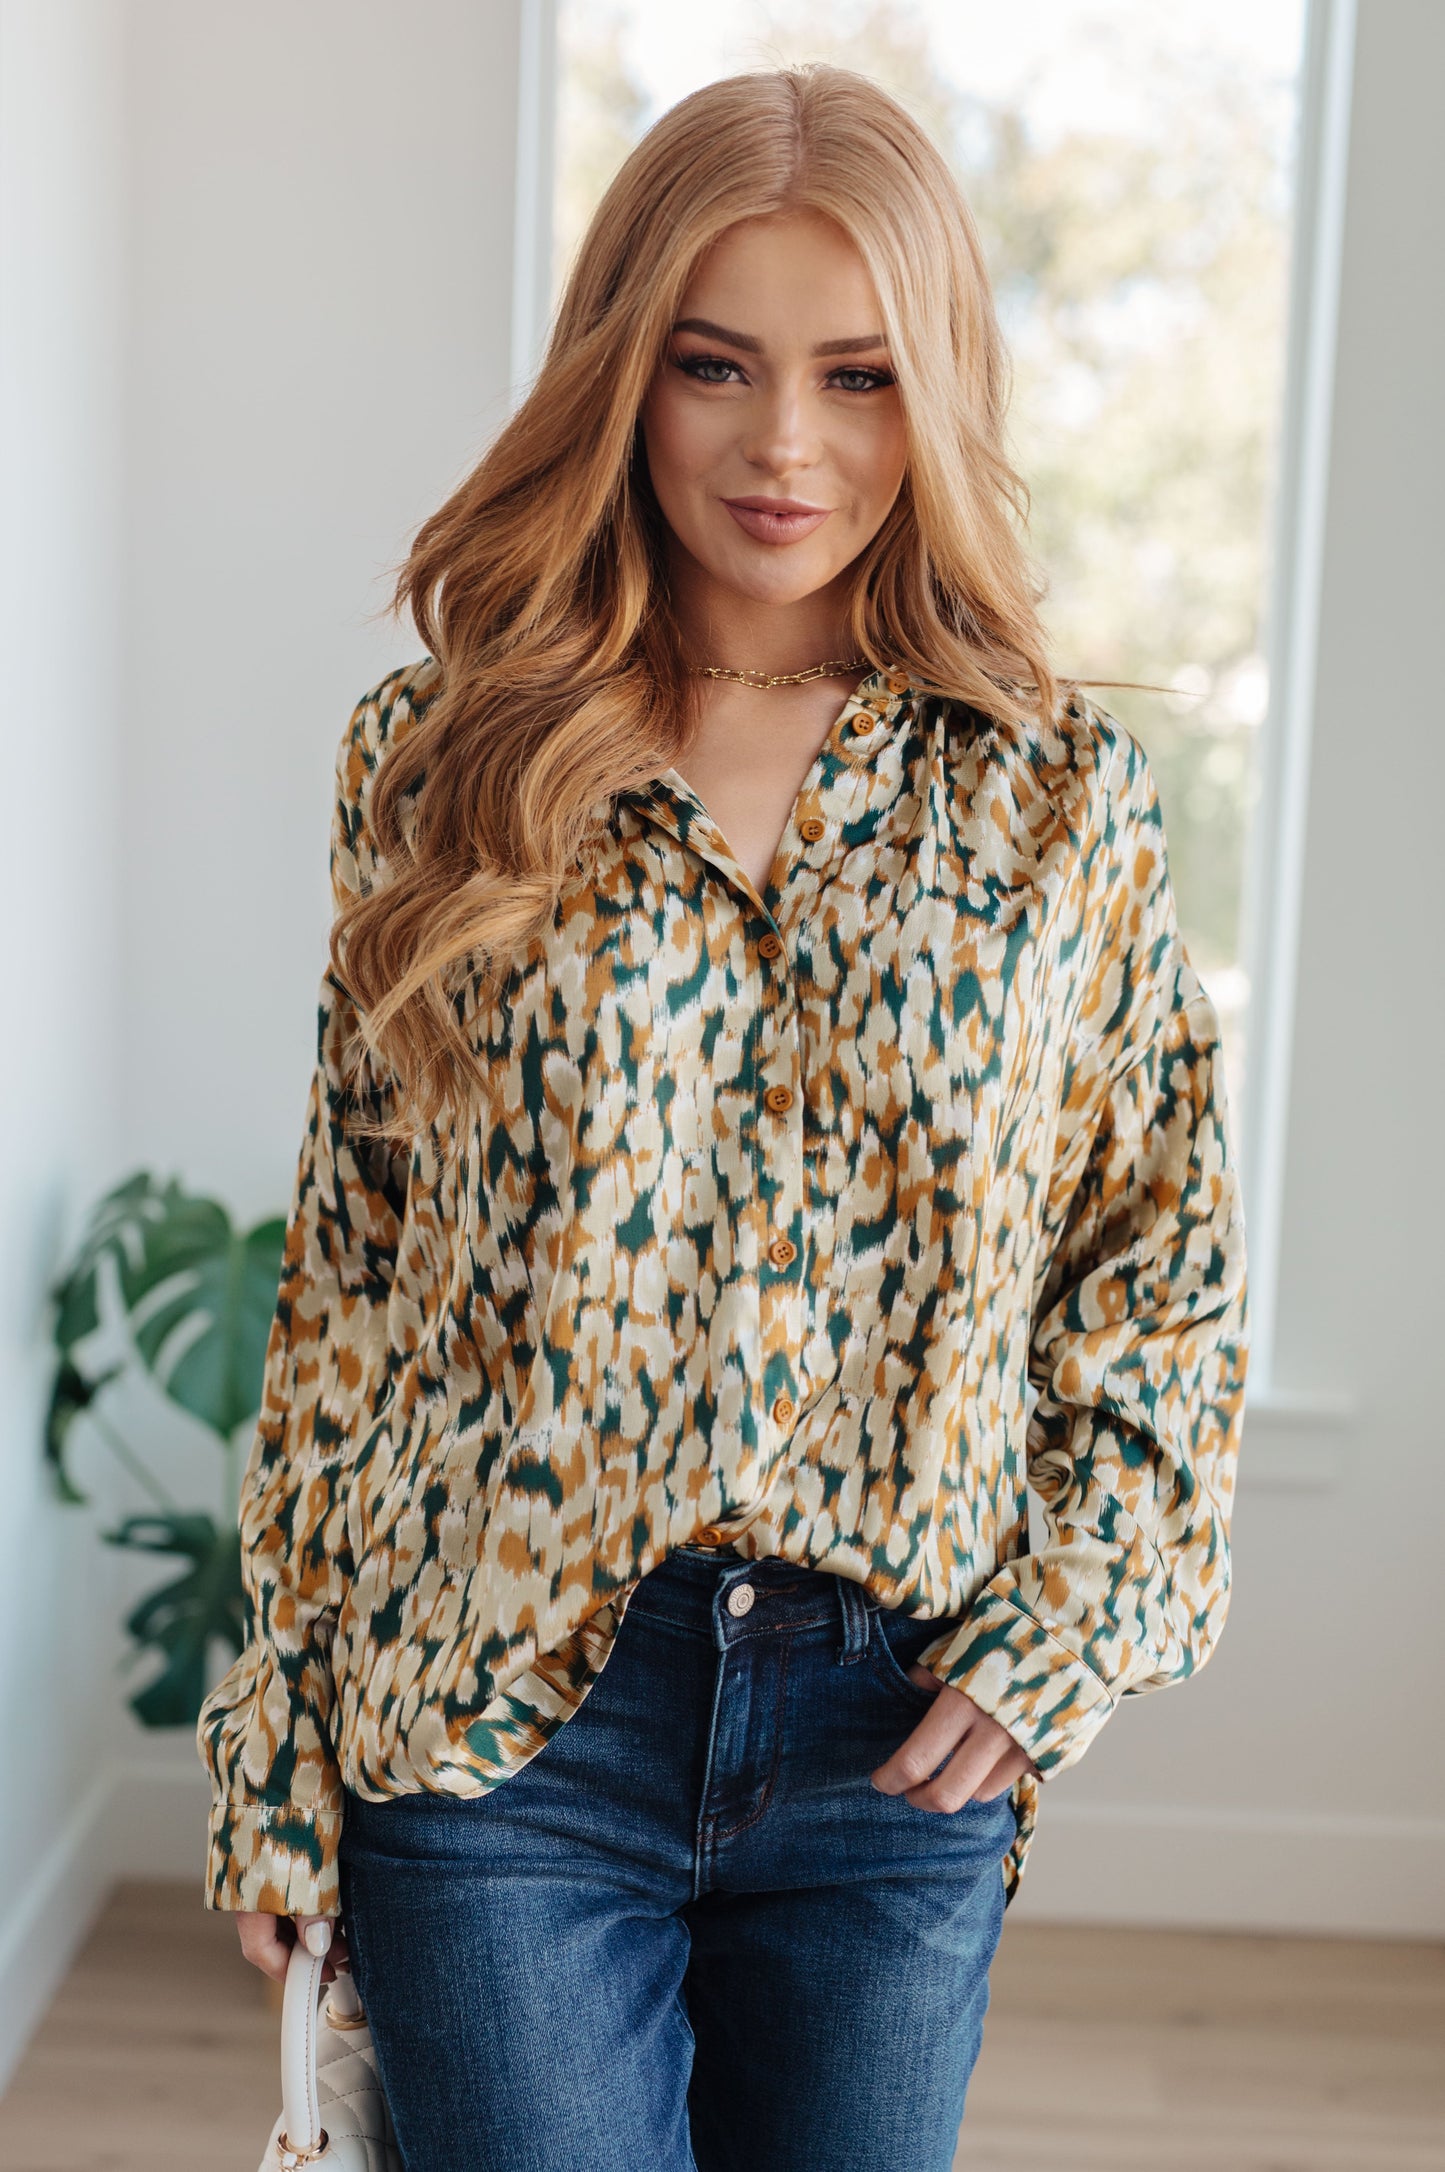 Introducing the In the Willows Button Up Blouse: created from luxurious poly satin for a stunning look that will have you feeling as confident as ever. This beautiful blouse features a collared neckline, button front fastening, and buttoned sleeve cuffs. With an elegant abstract print, this blouse will give you the perfect mix of modern and timeless style.